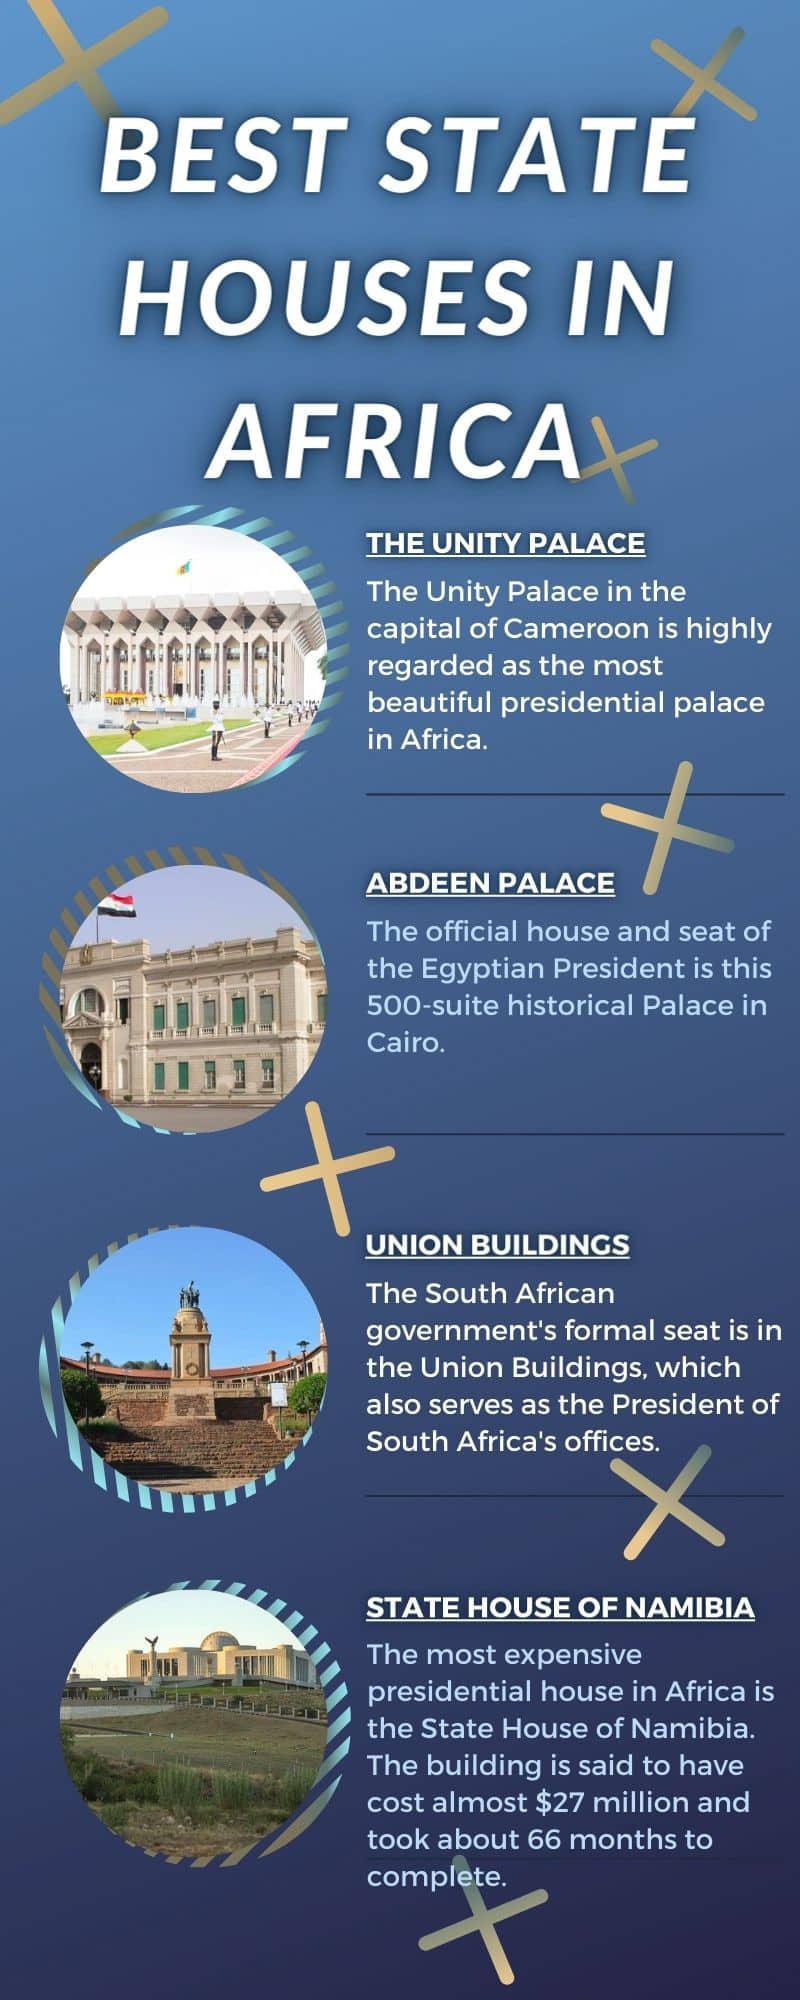 Best state houses in Africa